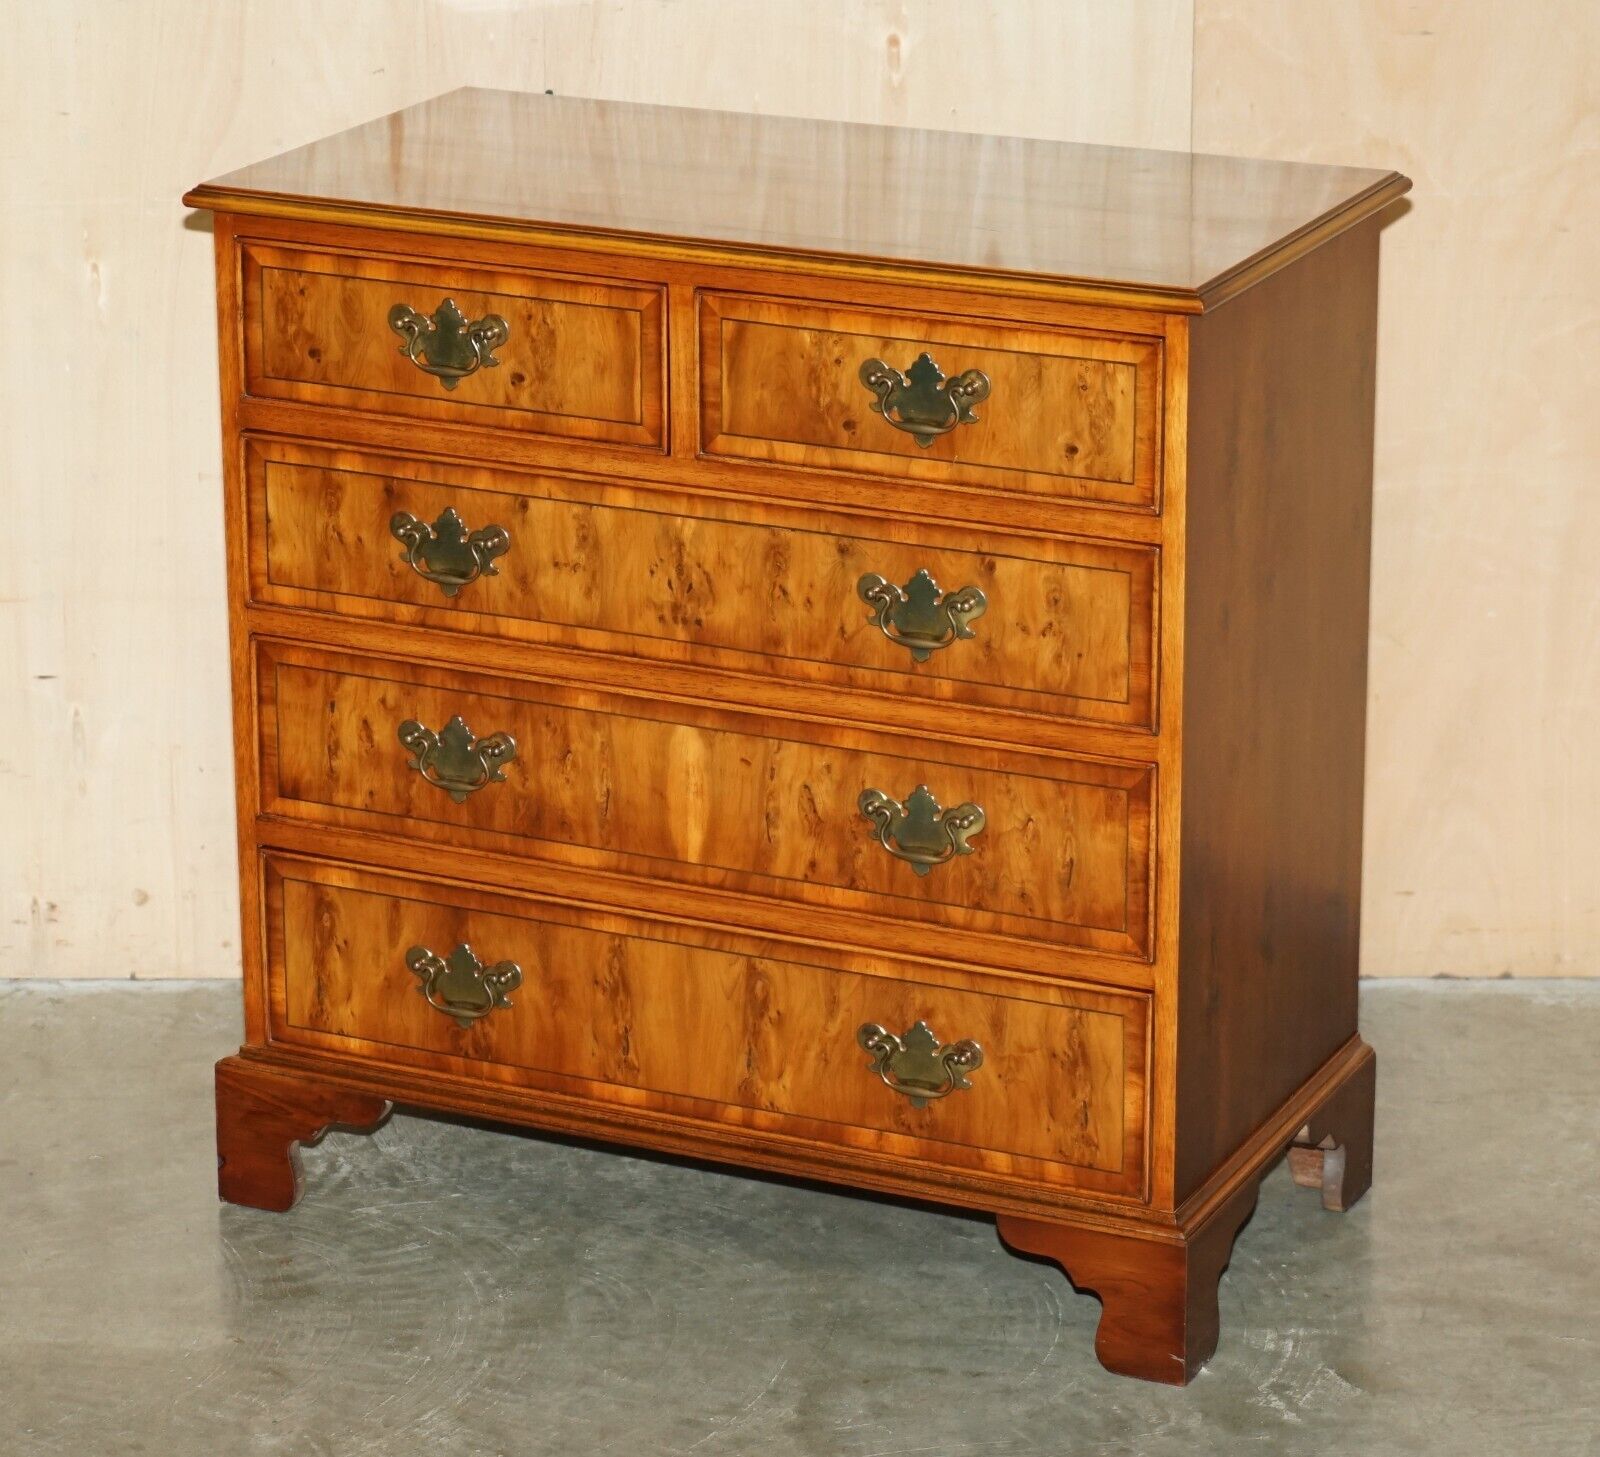 LOVELY VINTAGE BURR WALNUT GEORGIAN ENGLISH STYLE CHEST OF DRAWERS PART OF SUITE